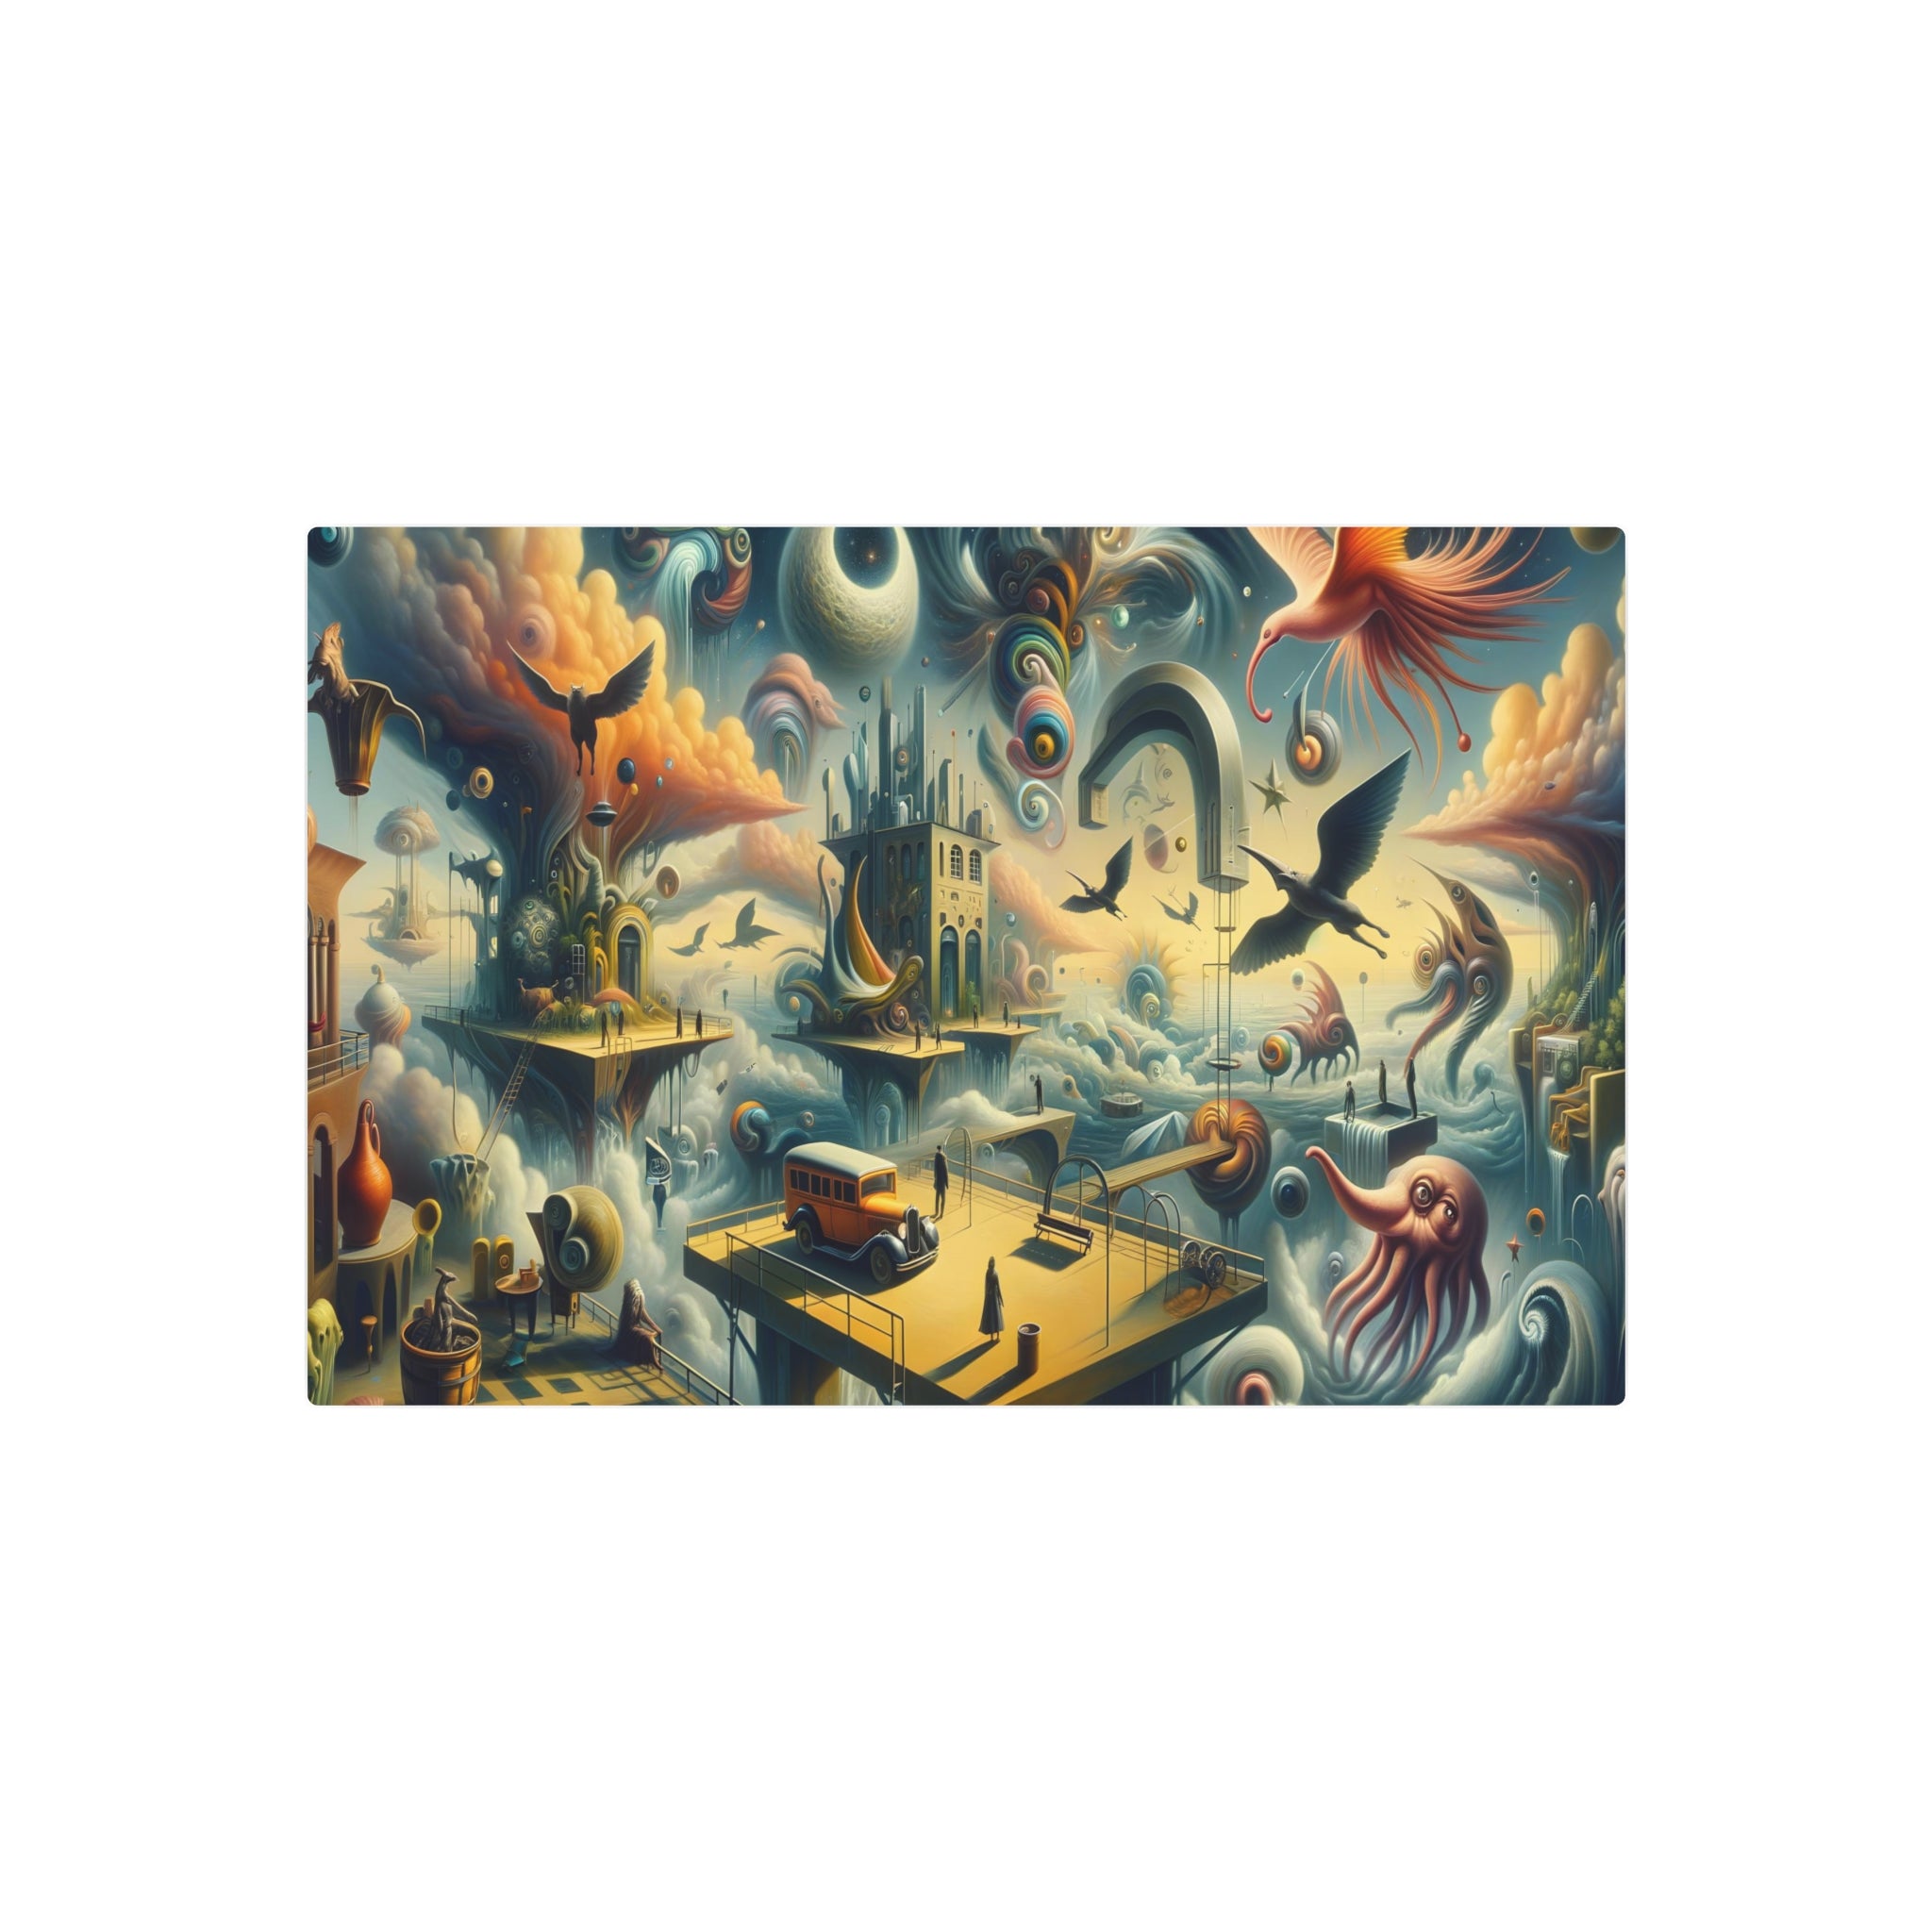 Metal Poster Art | "Surrealistic Dream-Inspired Artwork with Distorted Figures - Modern Contemporary Surrealism Style"